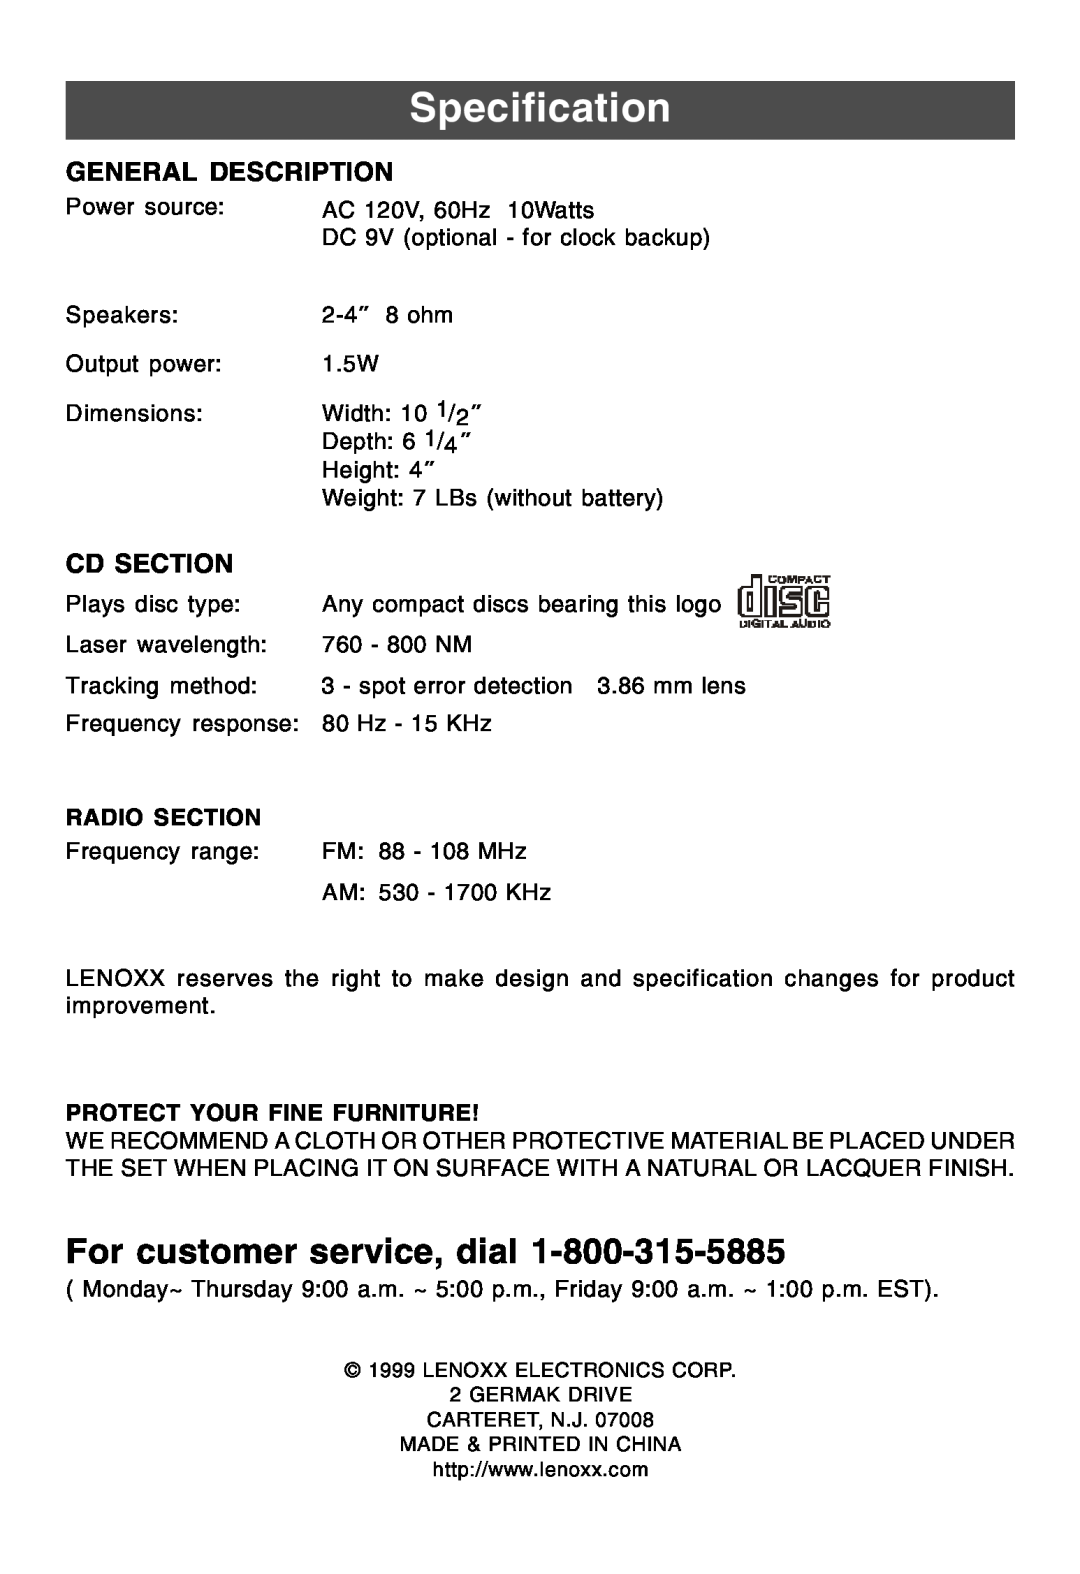 Lenoxx Electronics CDR-190 Specification, For customer service, dial, General Description, Cd Section 